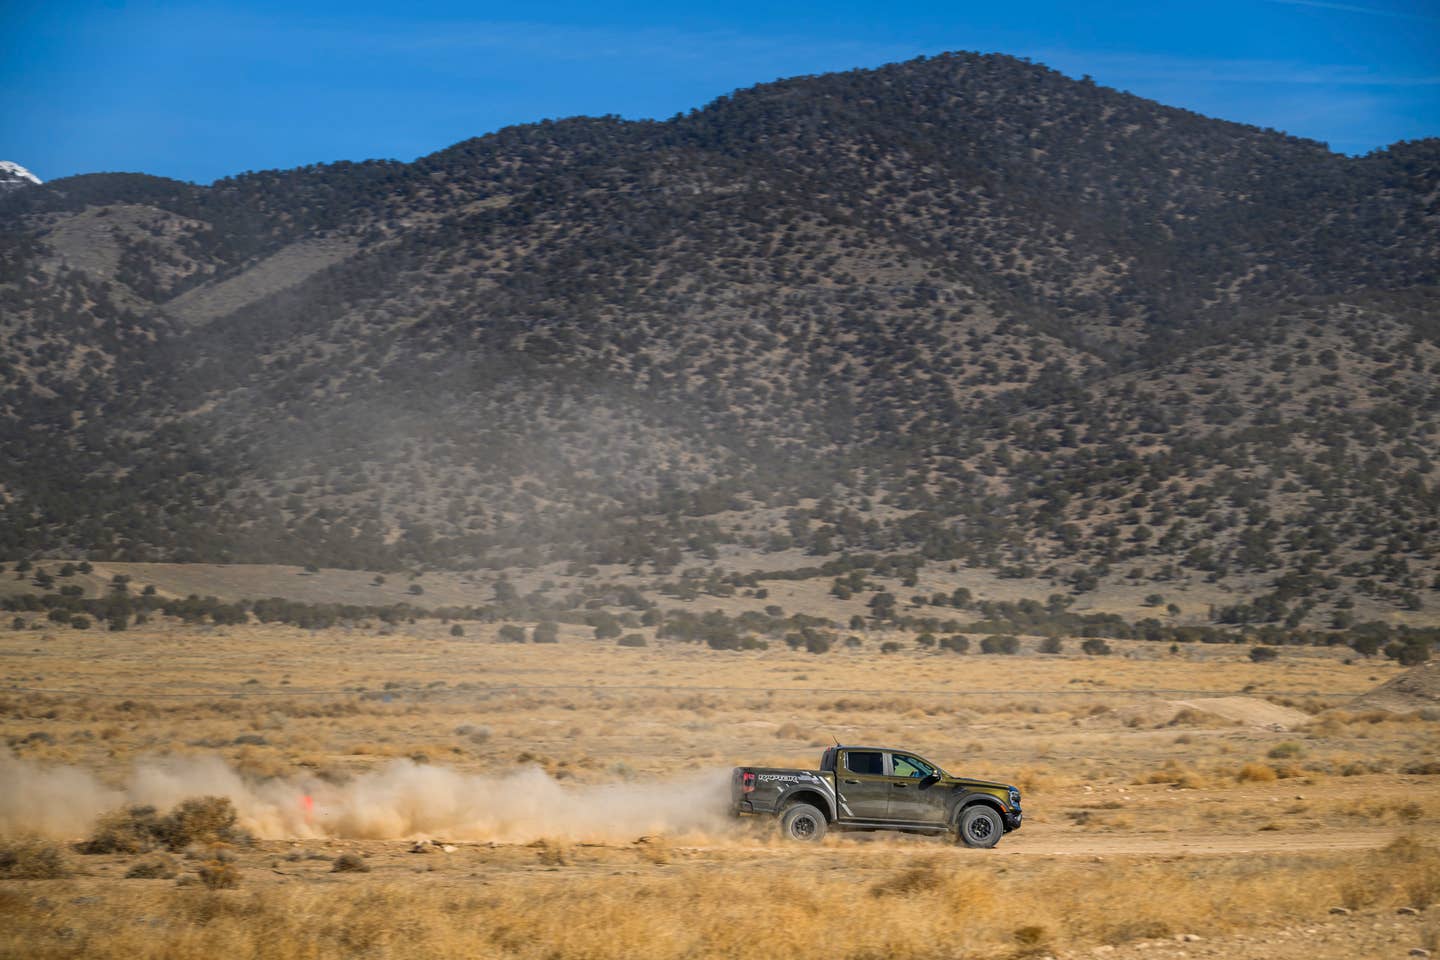 Do not attempt unless you have special off-road driving training and are driving on a closed course. Always consult the owner’s manual before off-road driving, know your terrain and trail difficulty, and use appropriate safety gear.